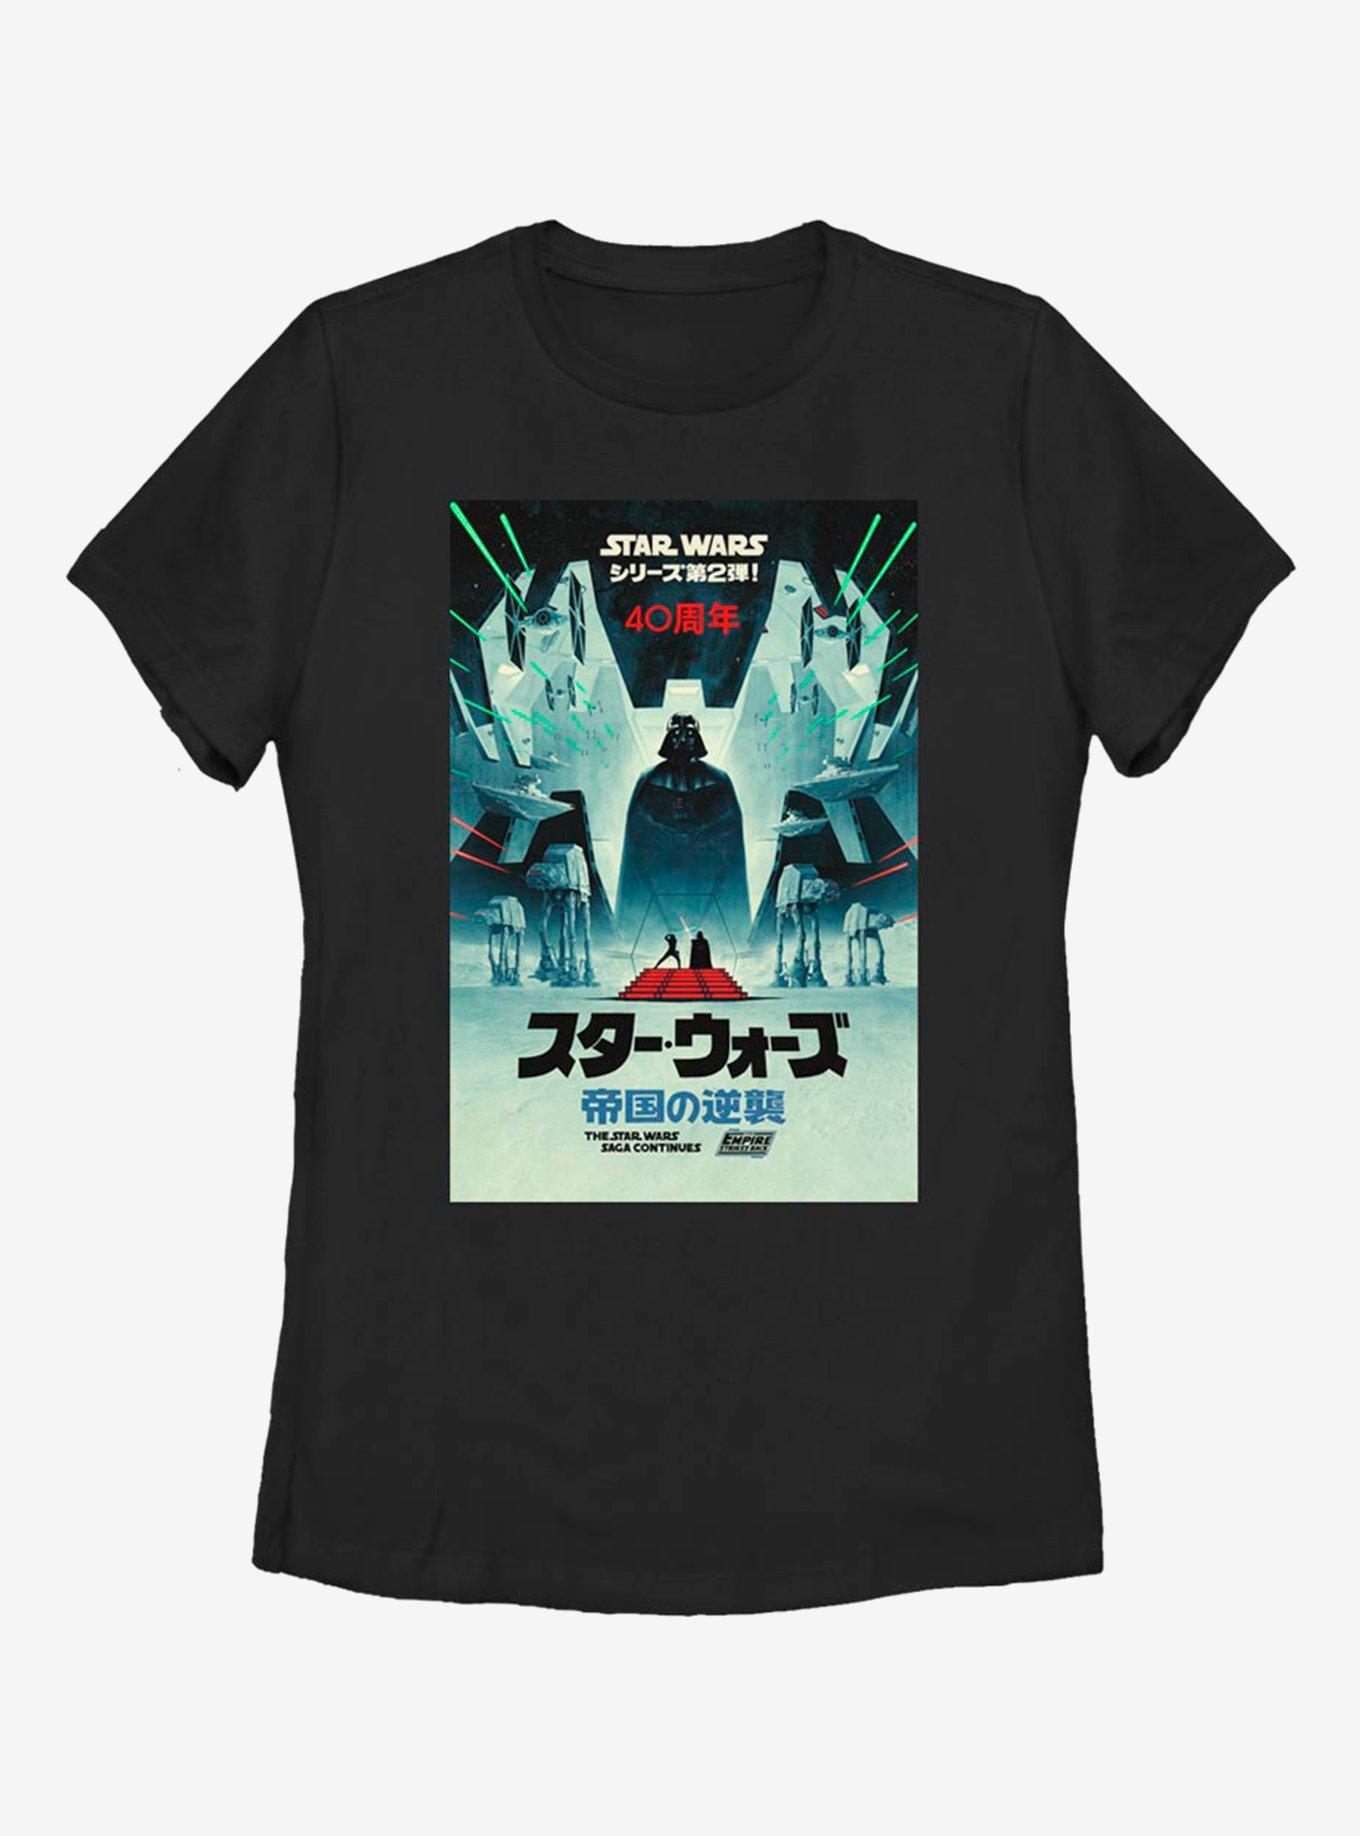 Star Wars Episode V: The Empire Strikes Back 40th Anniversary Japanese Poster Womens T-Shirt, , hi-res